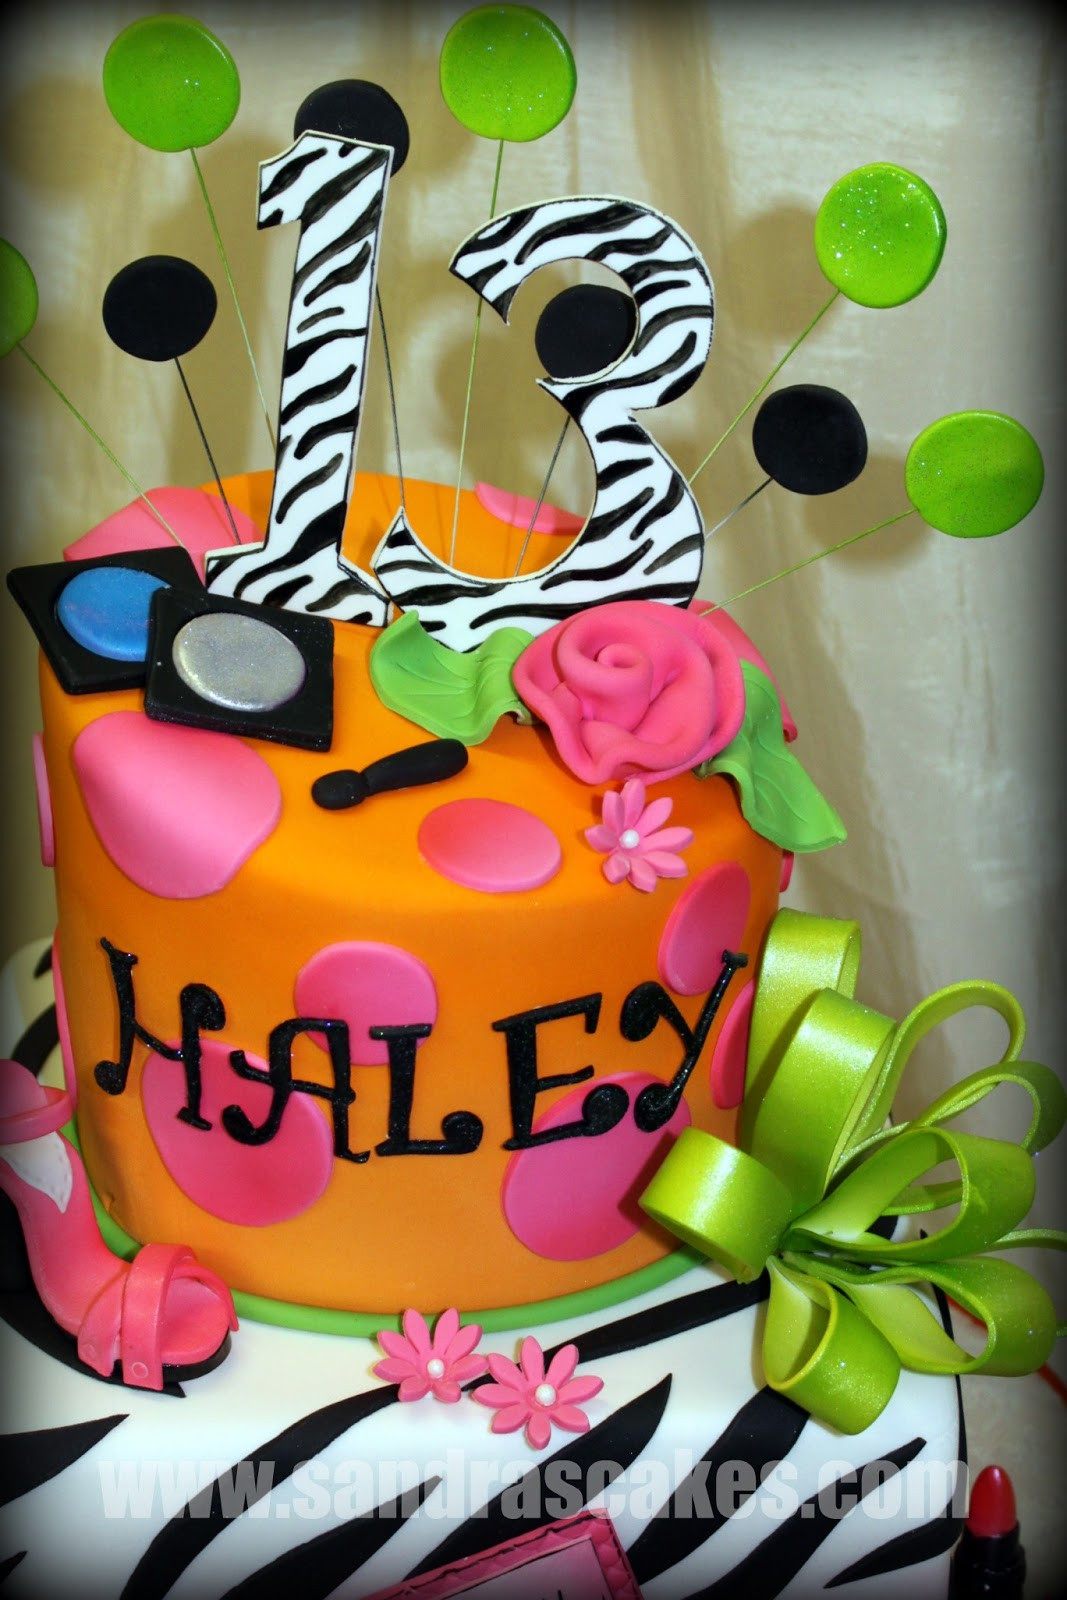 13 Birthday Gift Ideas
 Fun and Colorful 13th Birthday Cake